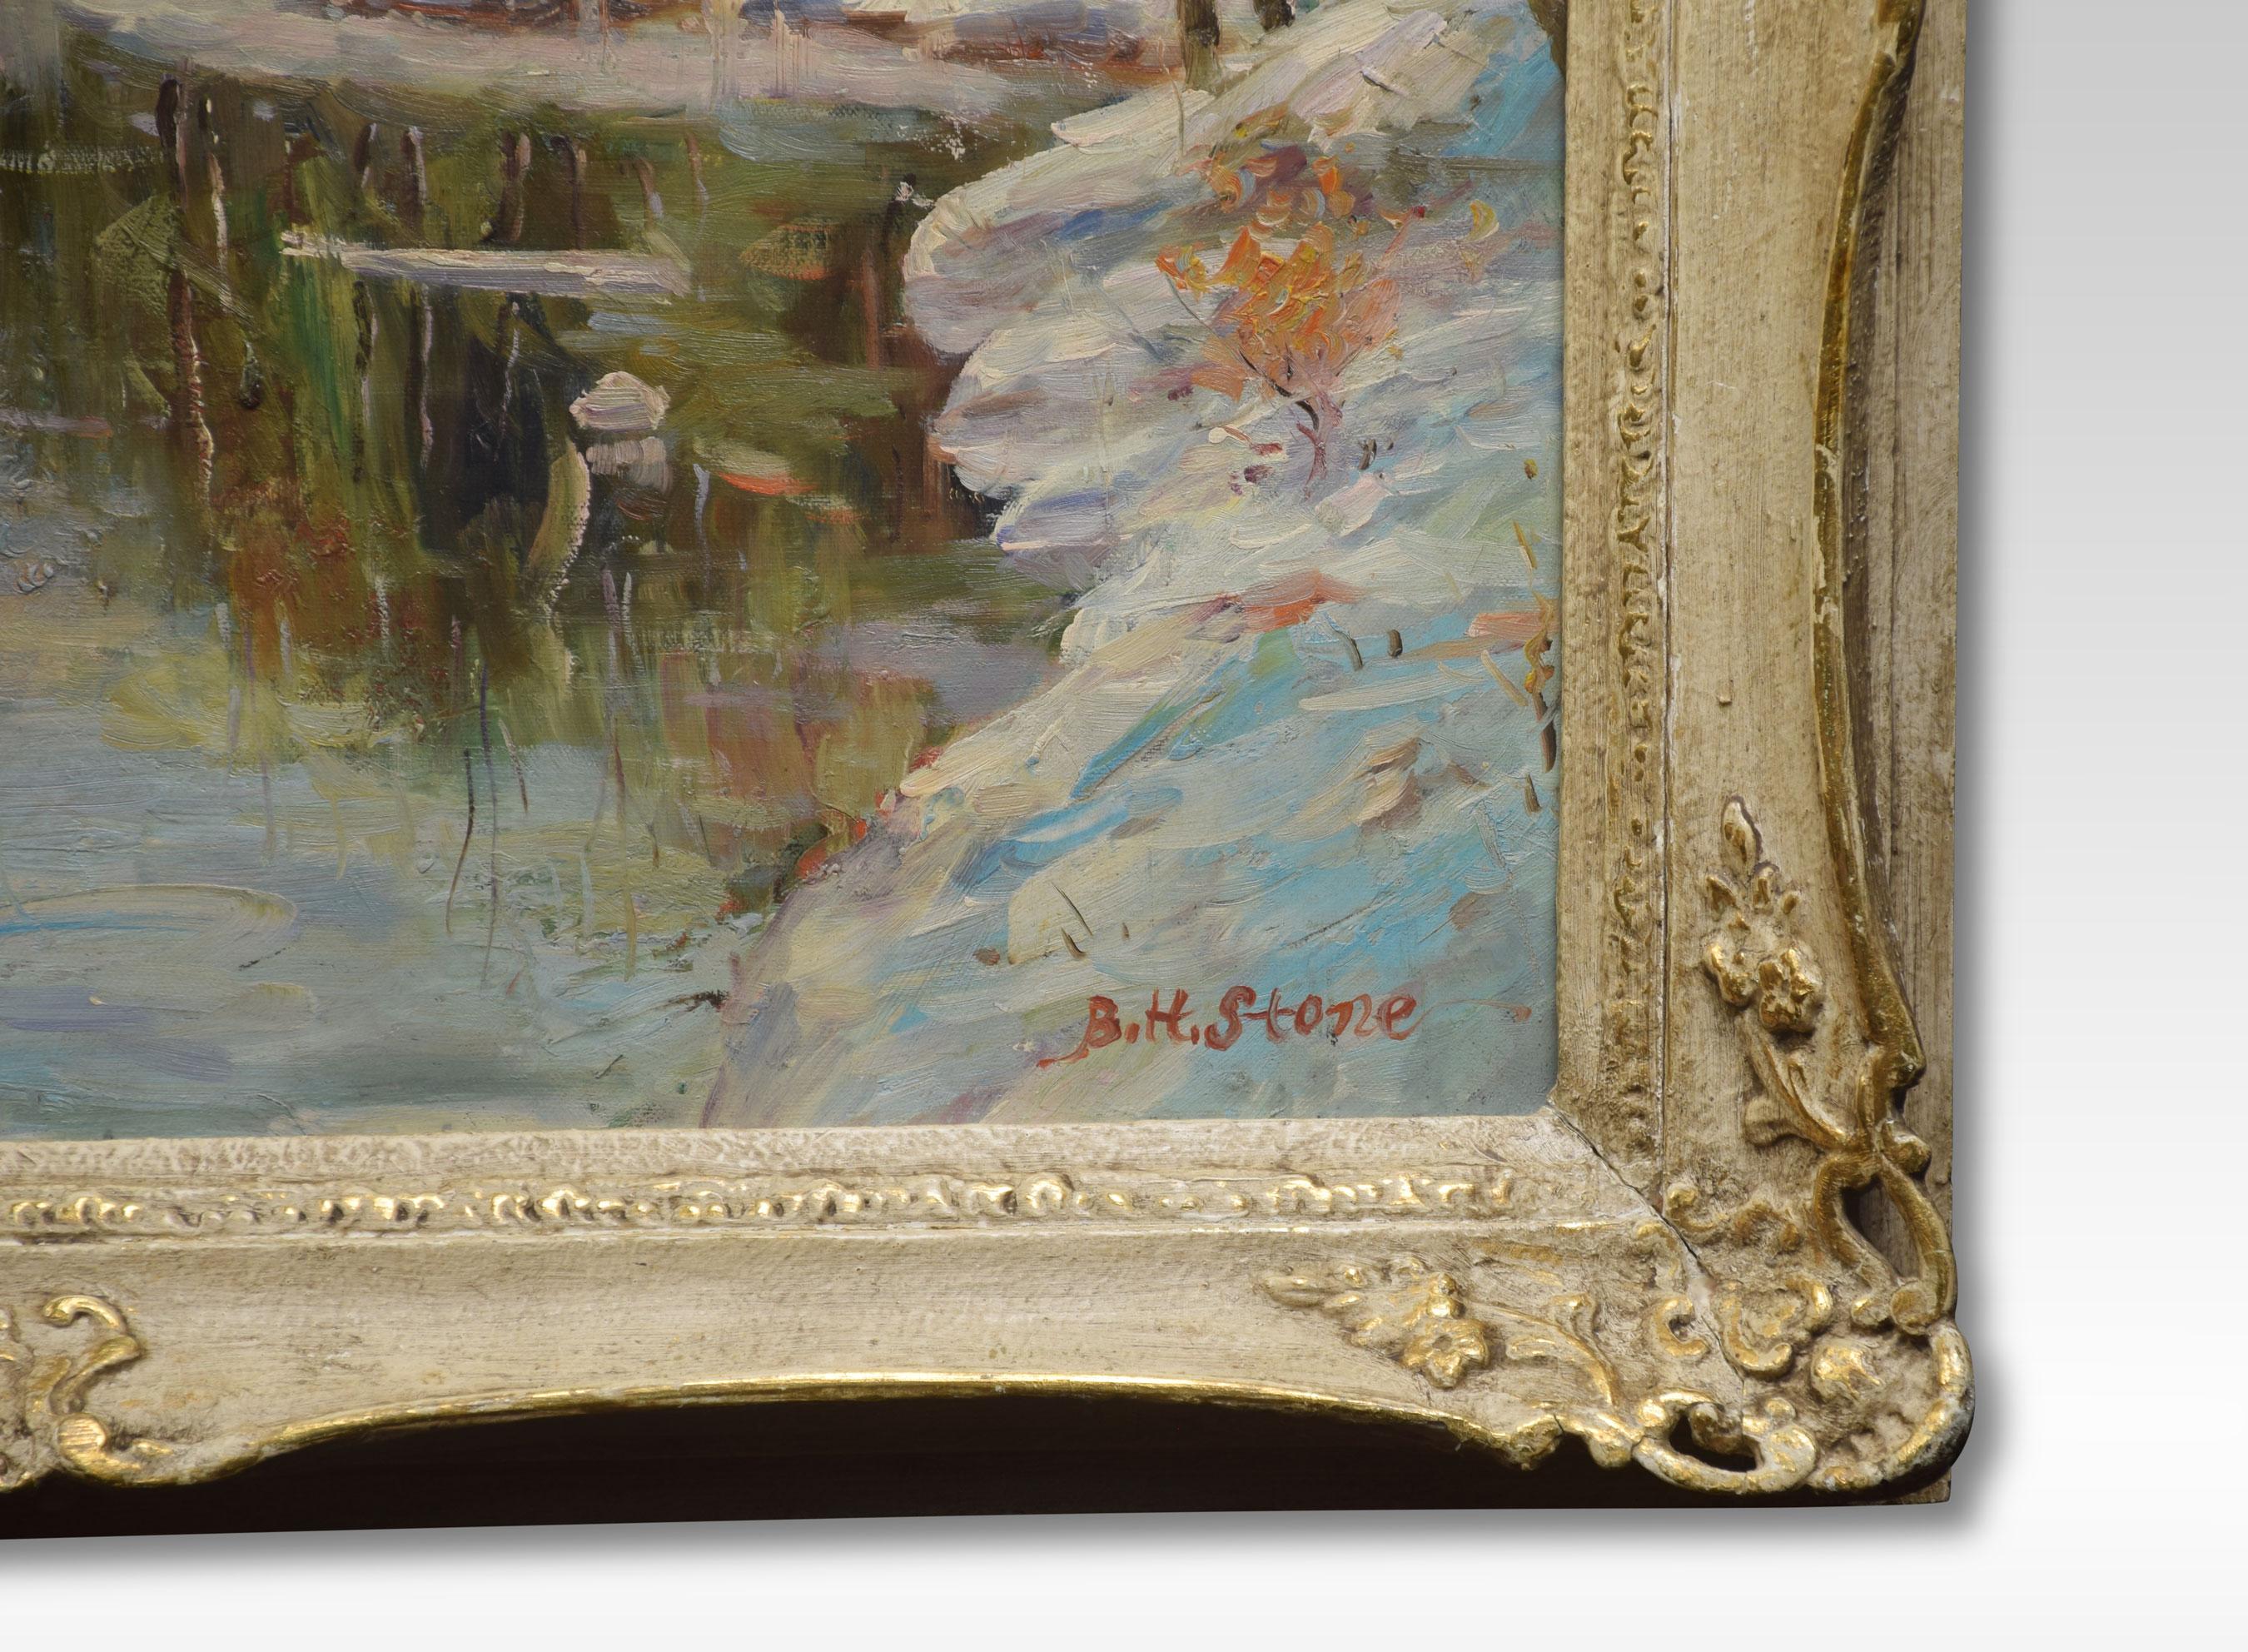 Oil on canvas signed B H Stone. Depicting a Canadian winter landscape encased in a carved frame.
Dimensions
Height 25 inches
Width 29.5 inches
Depth 3.5 inches.